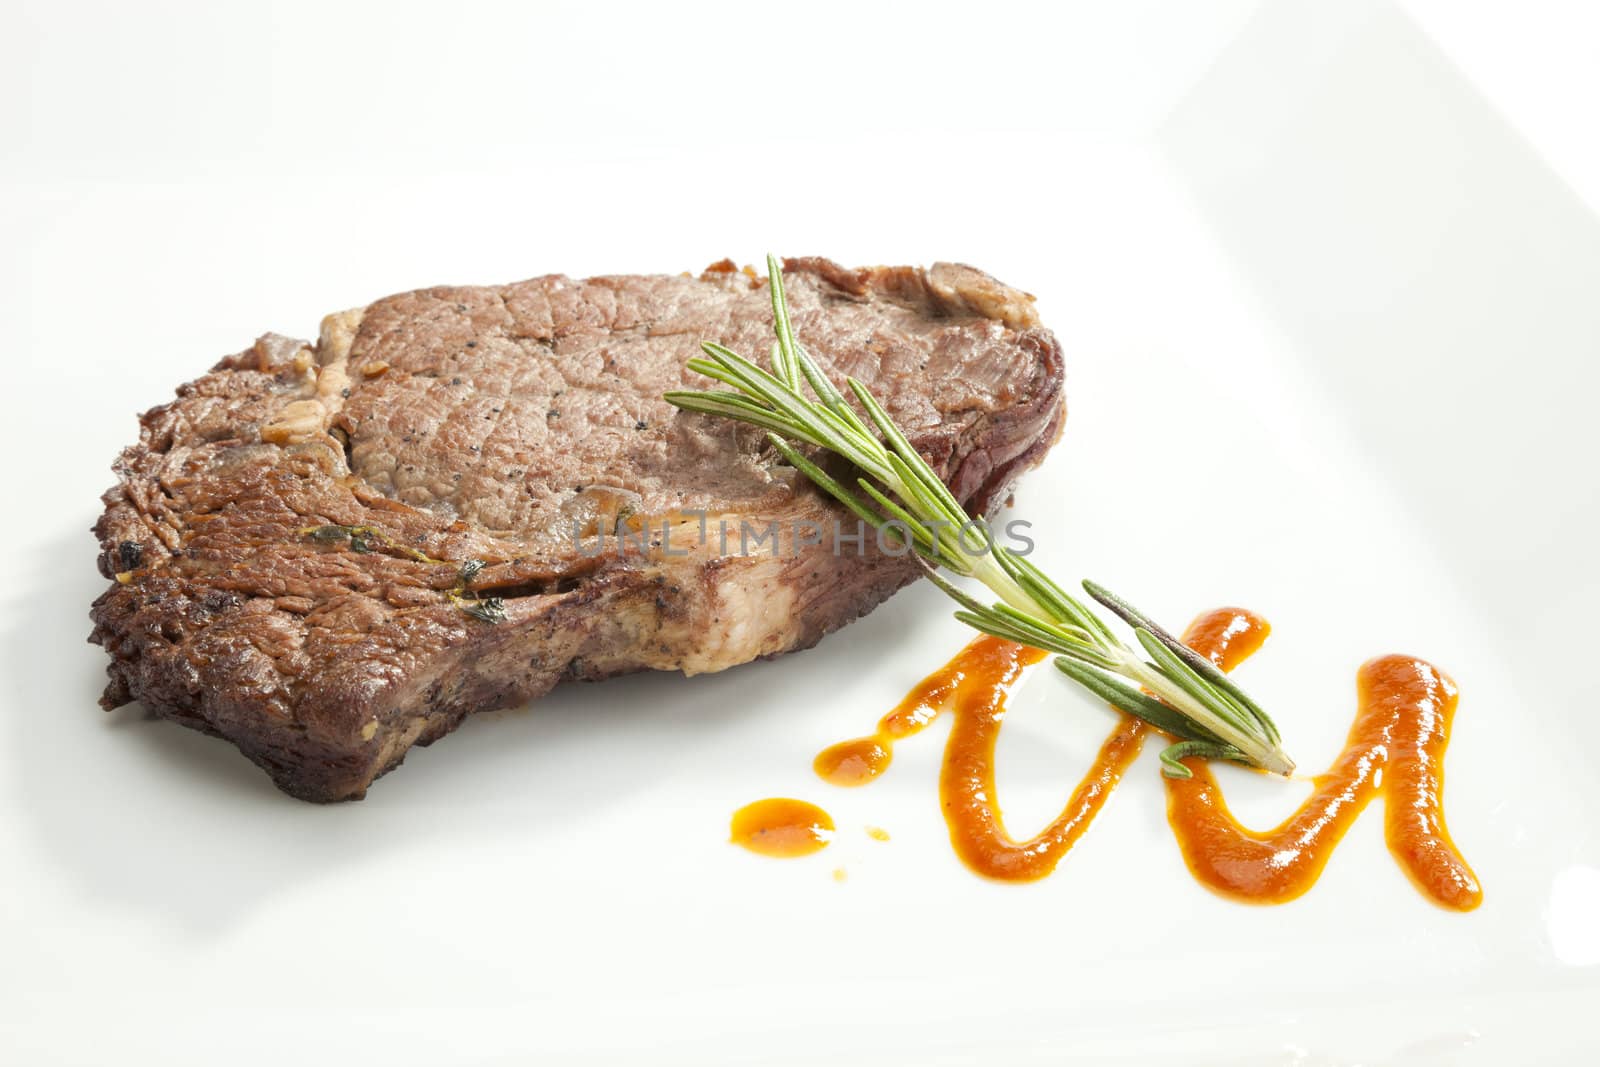 Grilled Sirloin steak with rosemary by hanusst